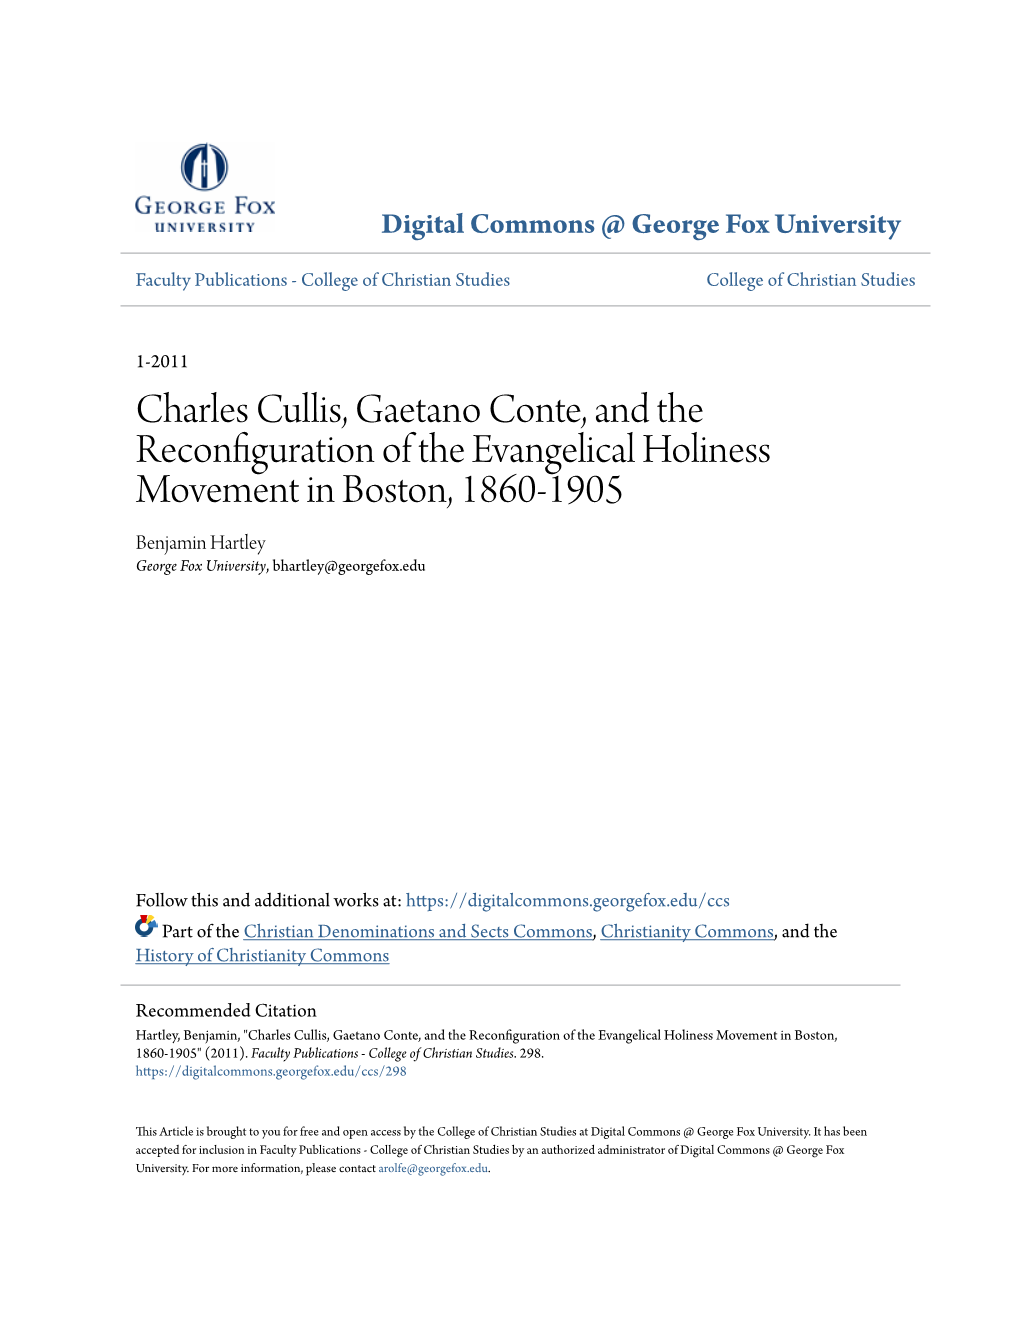 Charles Cullis, Gaetano Conte, and the Reconfiguration of The